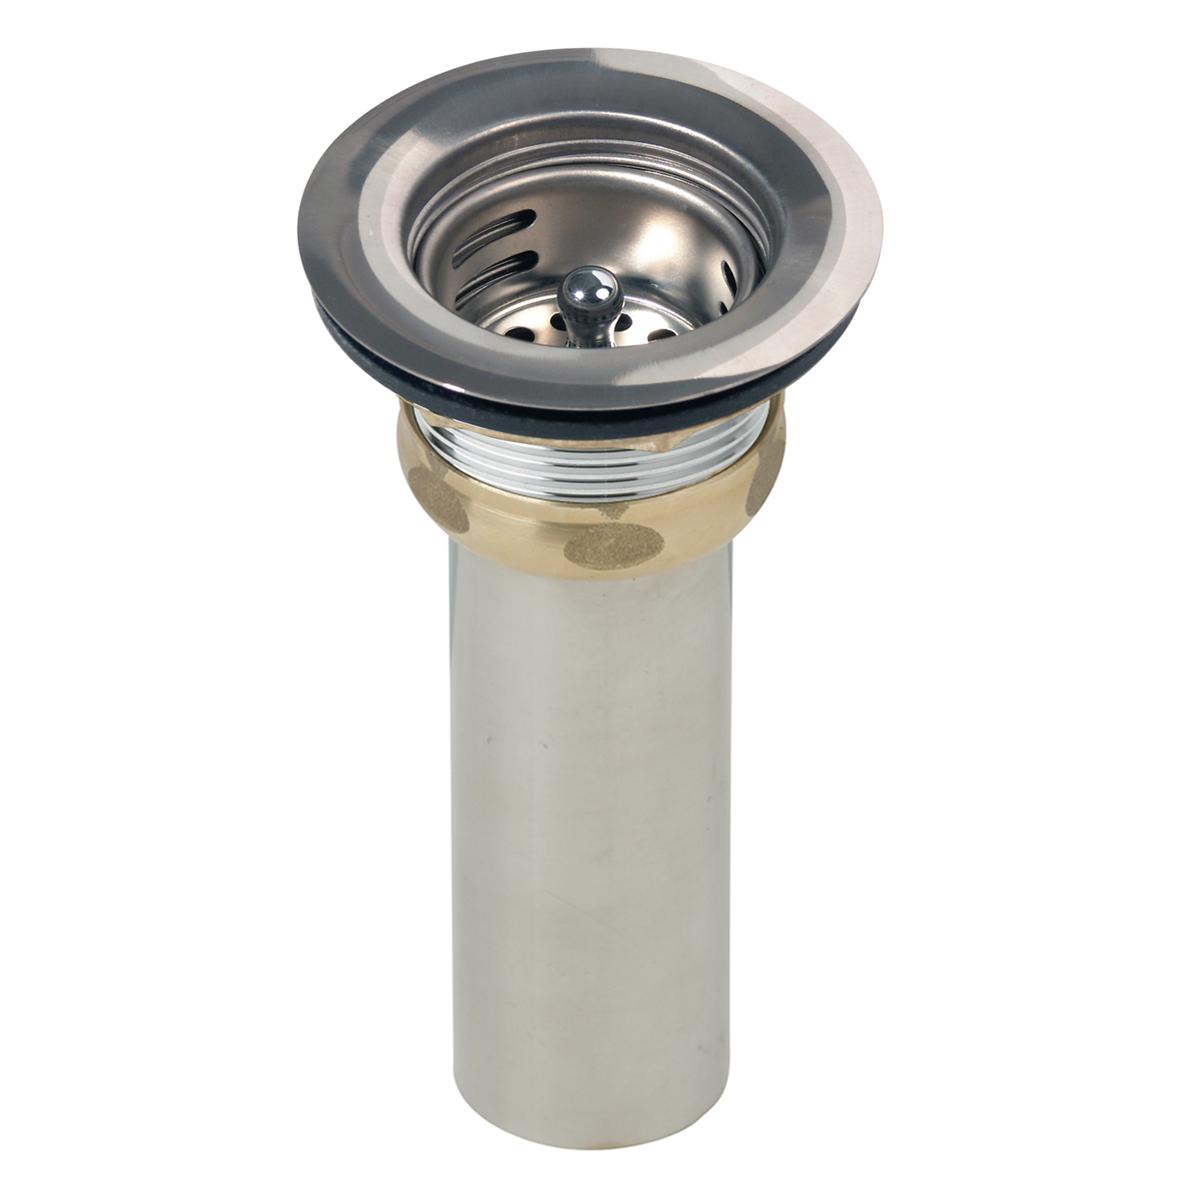 polished stainless steel drain strainer basket